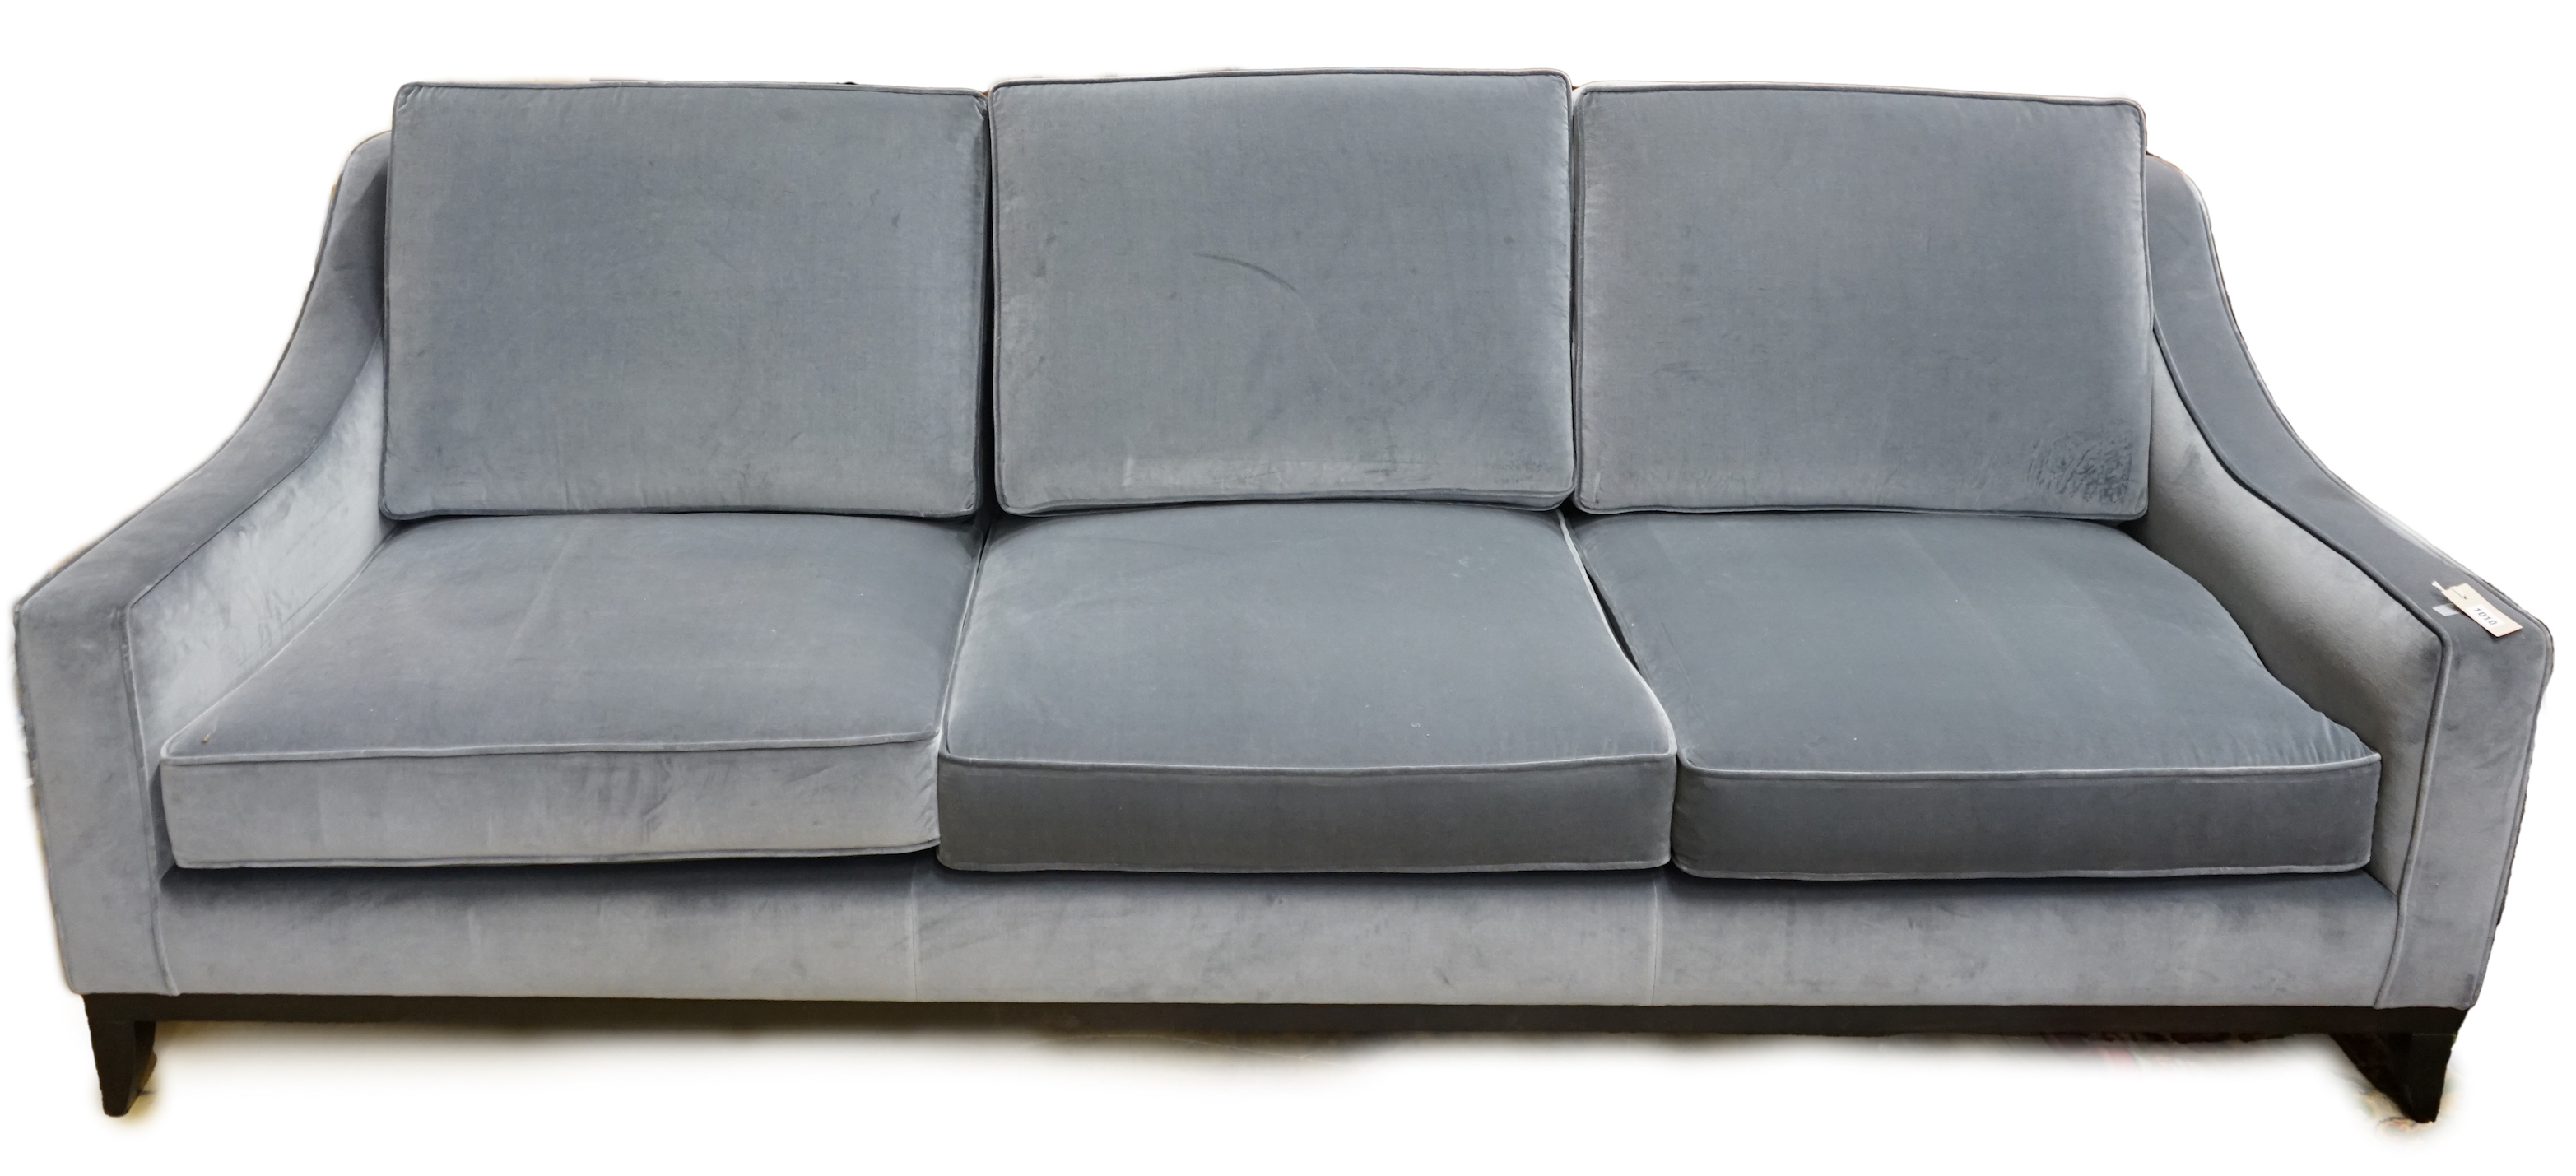 A Spencer three seater sofa by The Sofa and Chair Company, upholstered in Turnell and Gigon Gainsborough grey velvet, width 250cm, depth 100cm, height 90cm